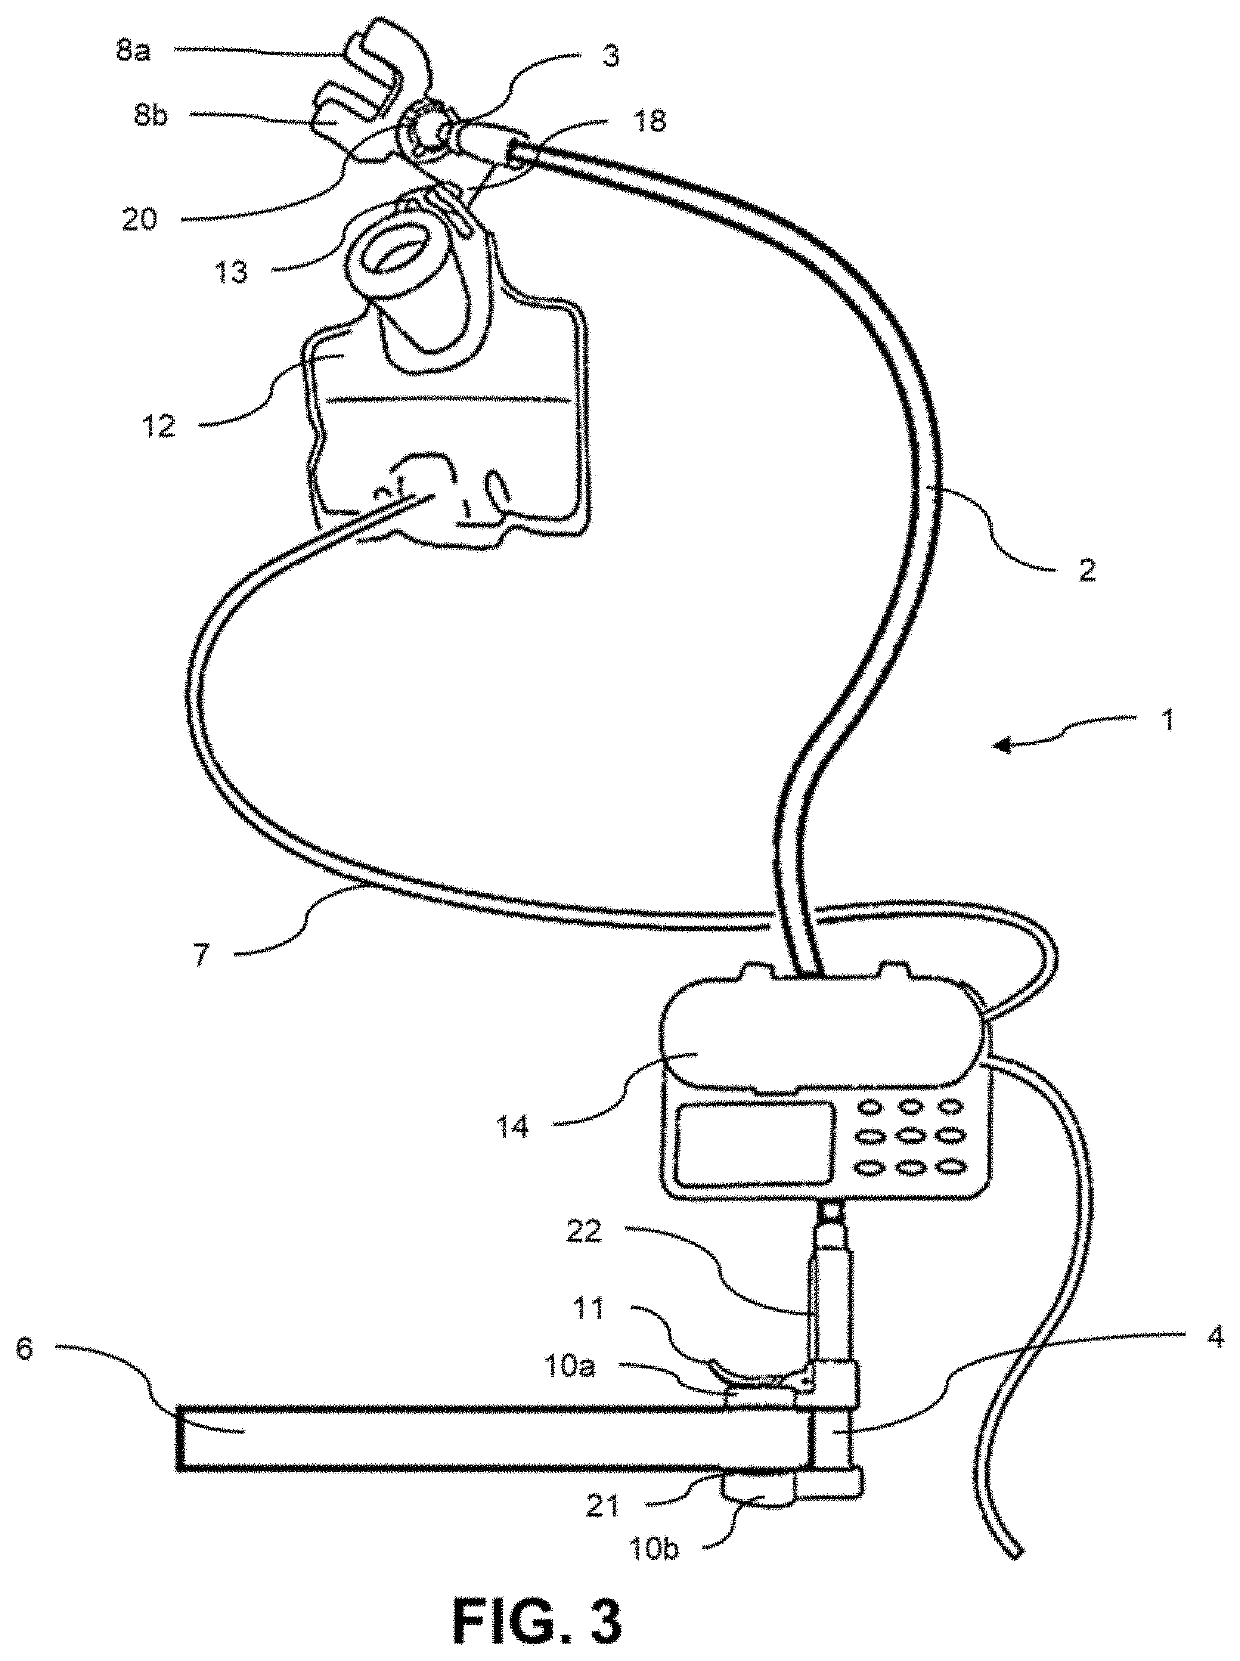 Device and Method Useful in Mobile Administering of Feed Products to Patients